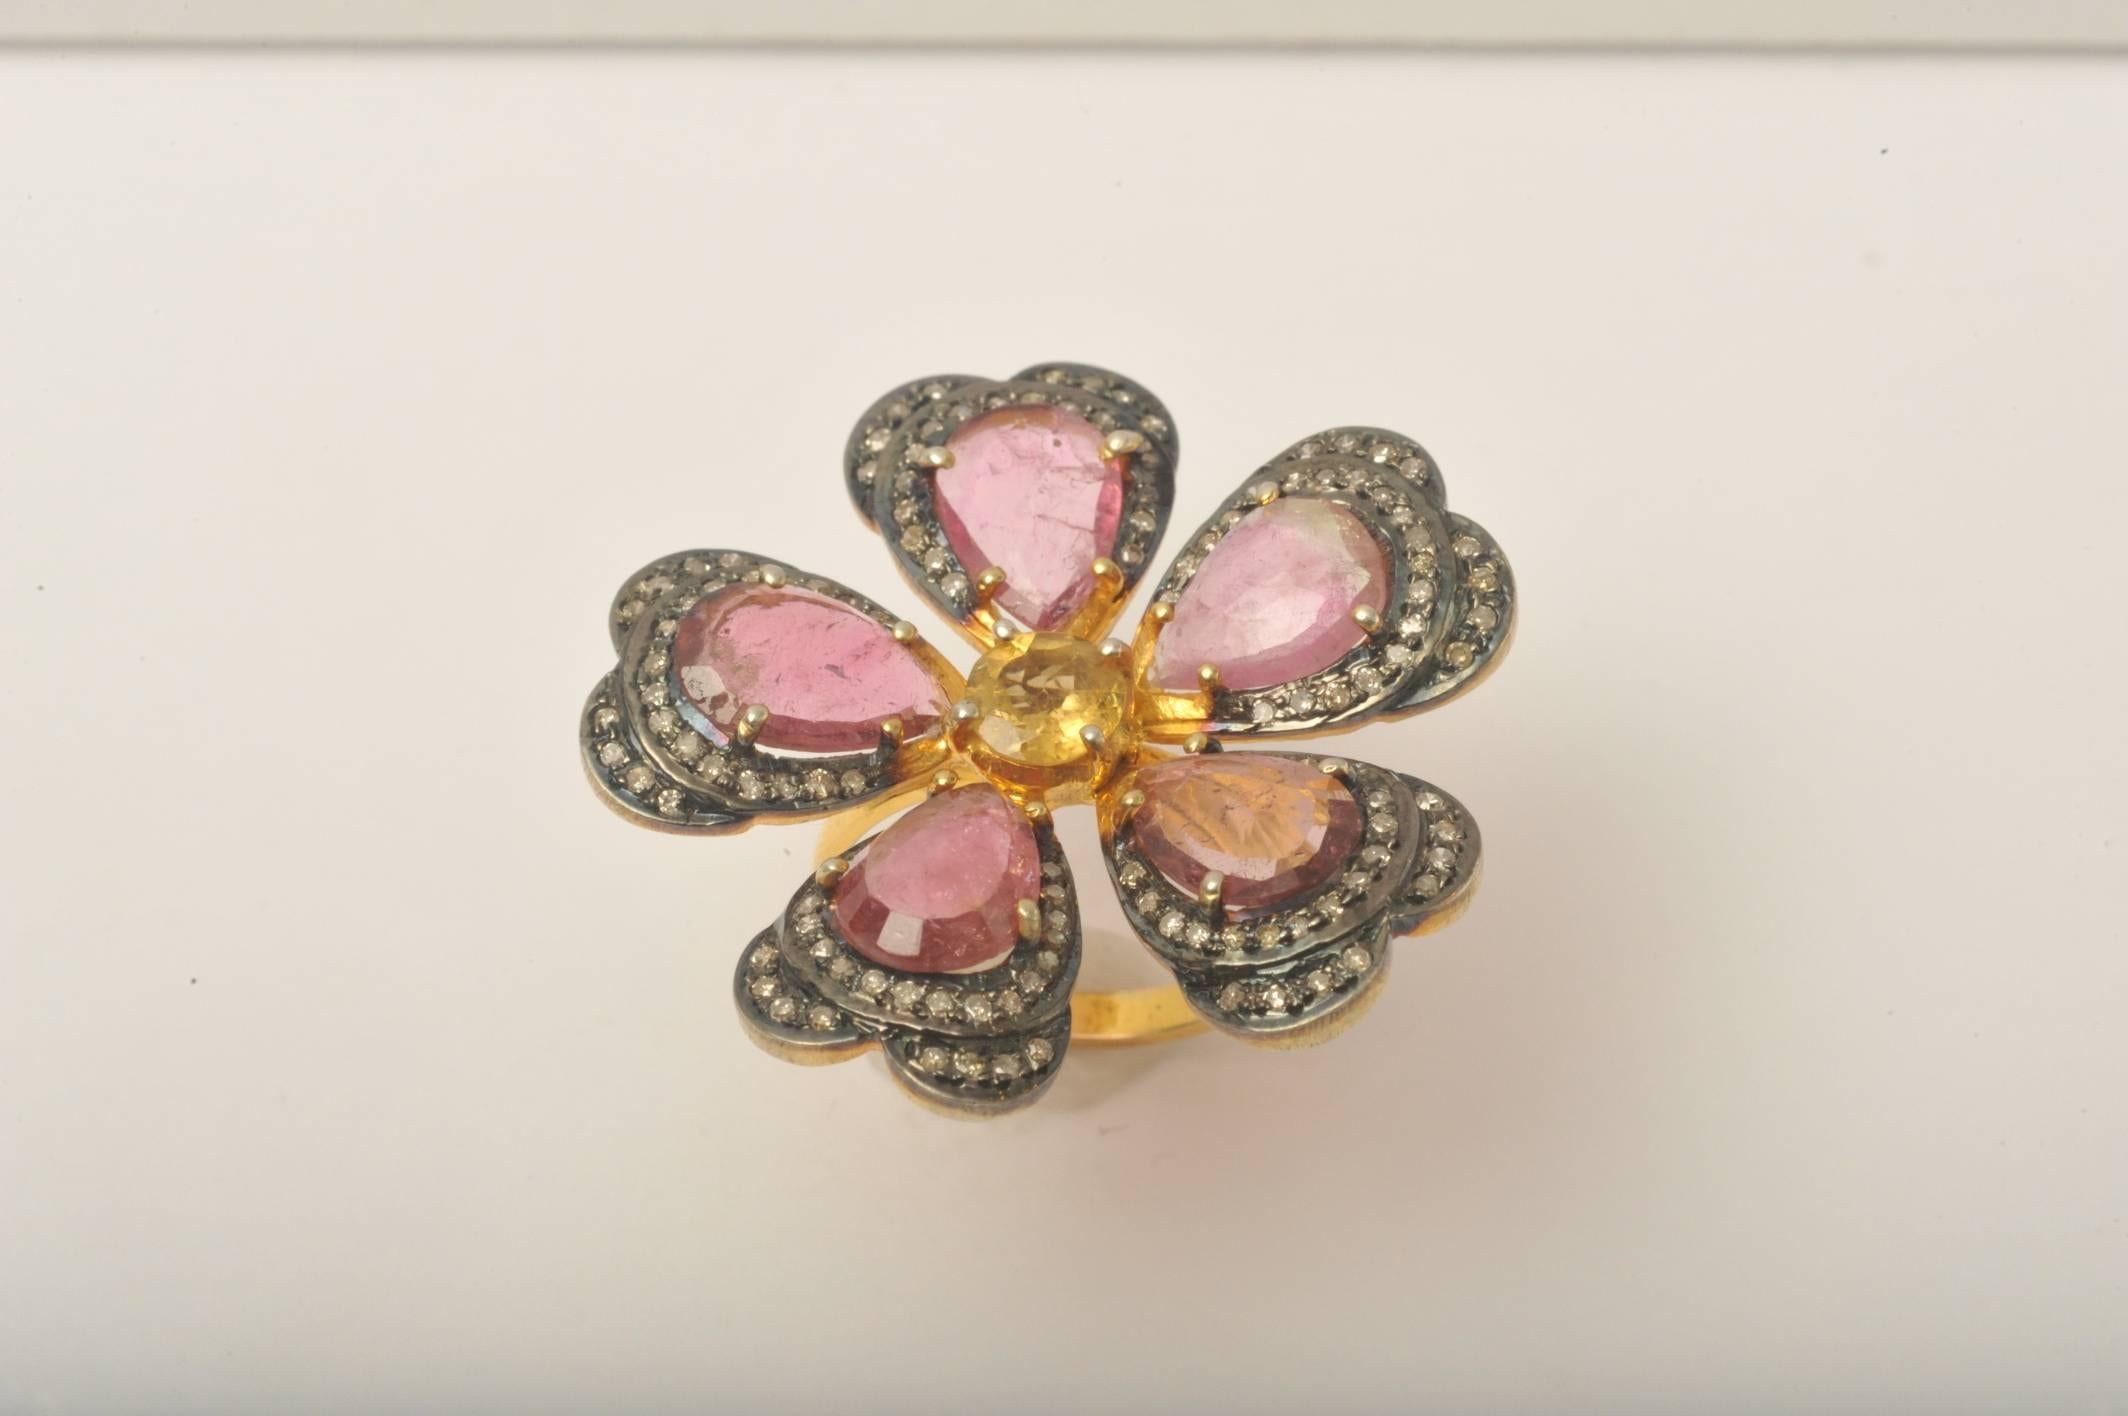 A stunning flower ring of pear-shaped, faceted pink tourmalines bordered with pave`set diamonds set in oxidized sterling.  At the center is a faceted yellow tourmaline bordered in vermeil, as is the band.

Carat weight for tourmalines is